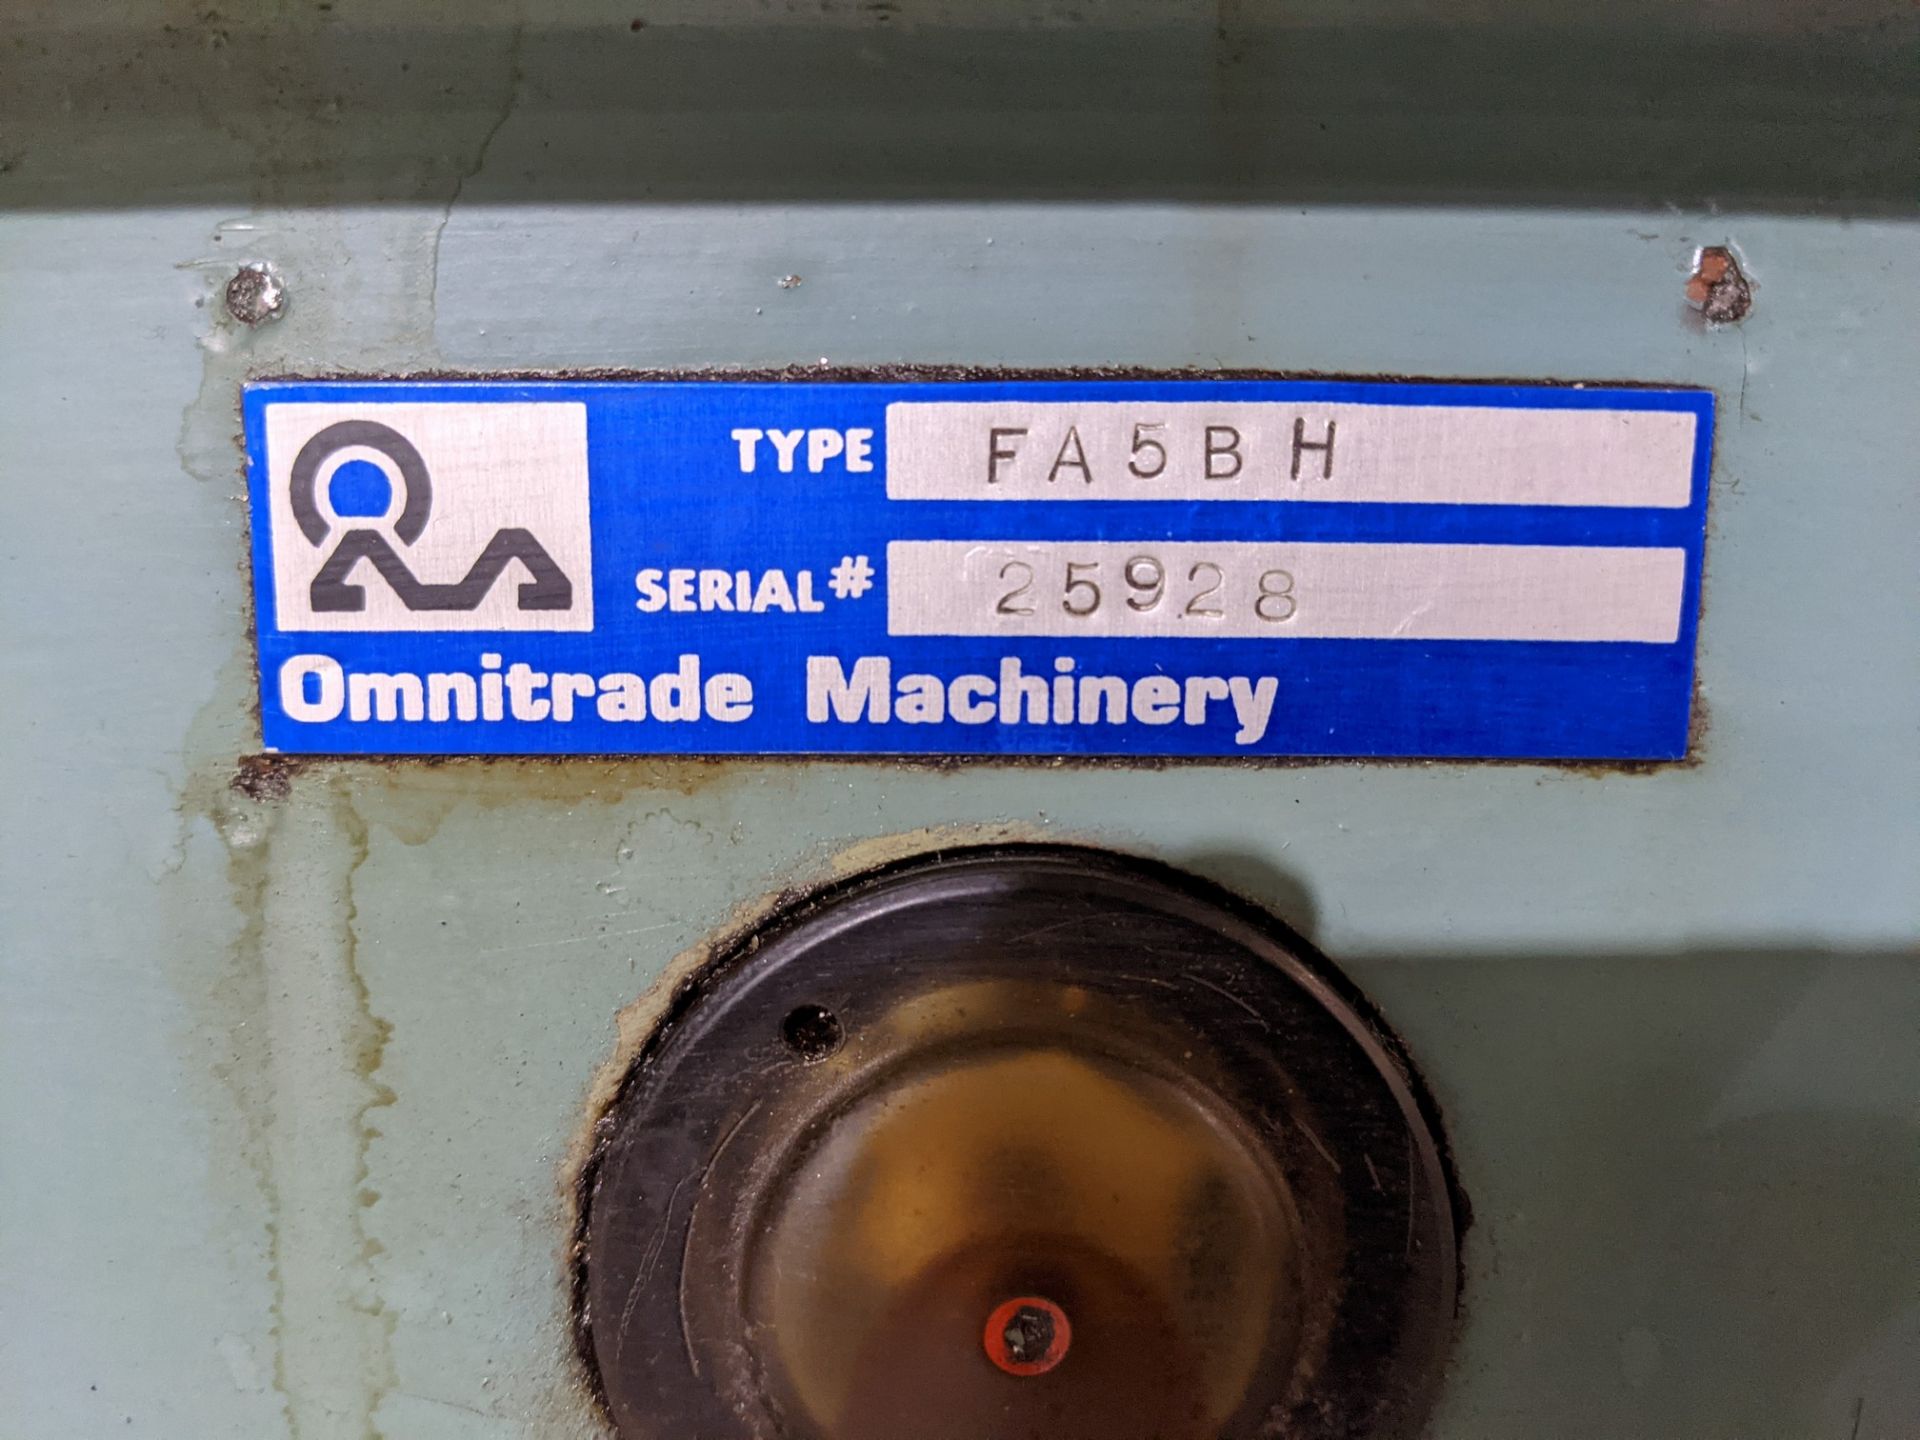 TOS FA5BH MILLING MACHINE, S/N 25928, 20HP, ARBOUR SUPPORTS, 18” X 80” TABLE - Image 10 of 16